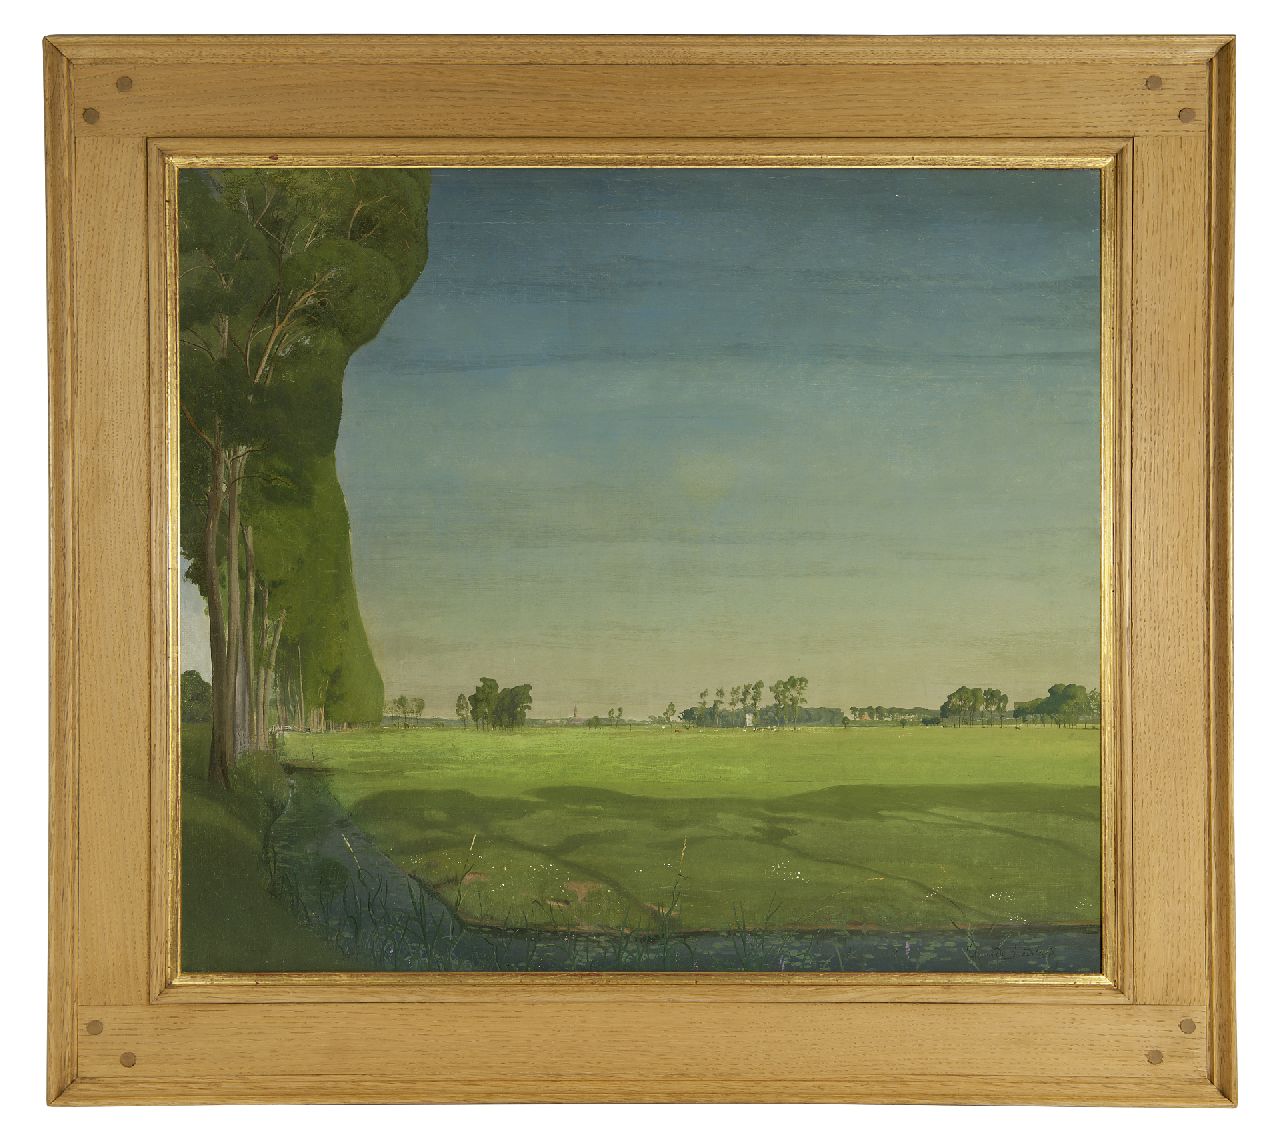 Saedeleer V. de | Valerius de Saedeleer, Fields and pastures, oil on canvas 65.7 x 75.8 cm, signed l.r. and painted ca. 1907